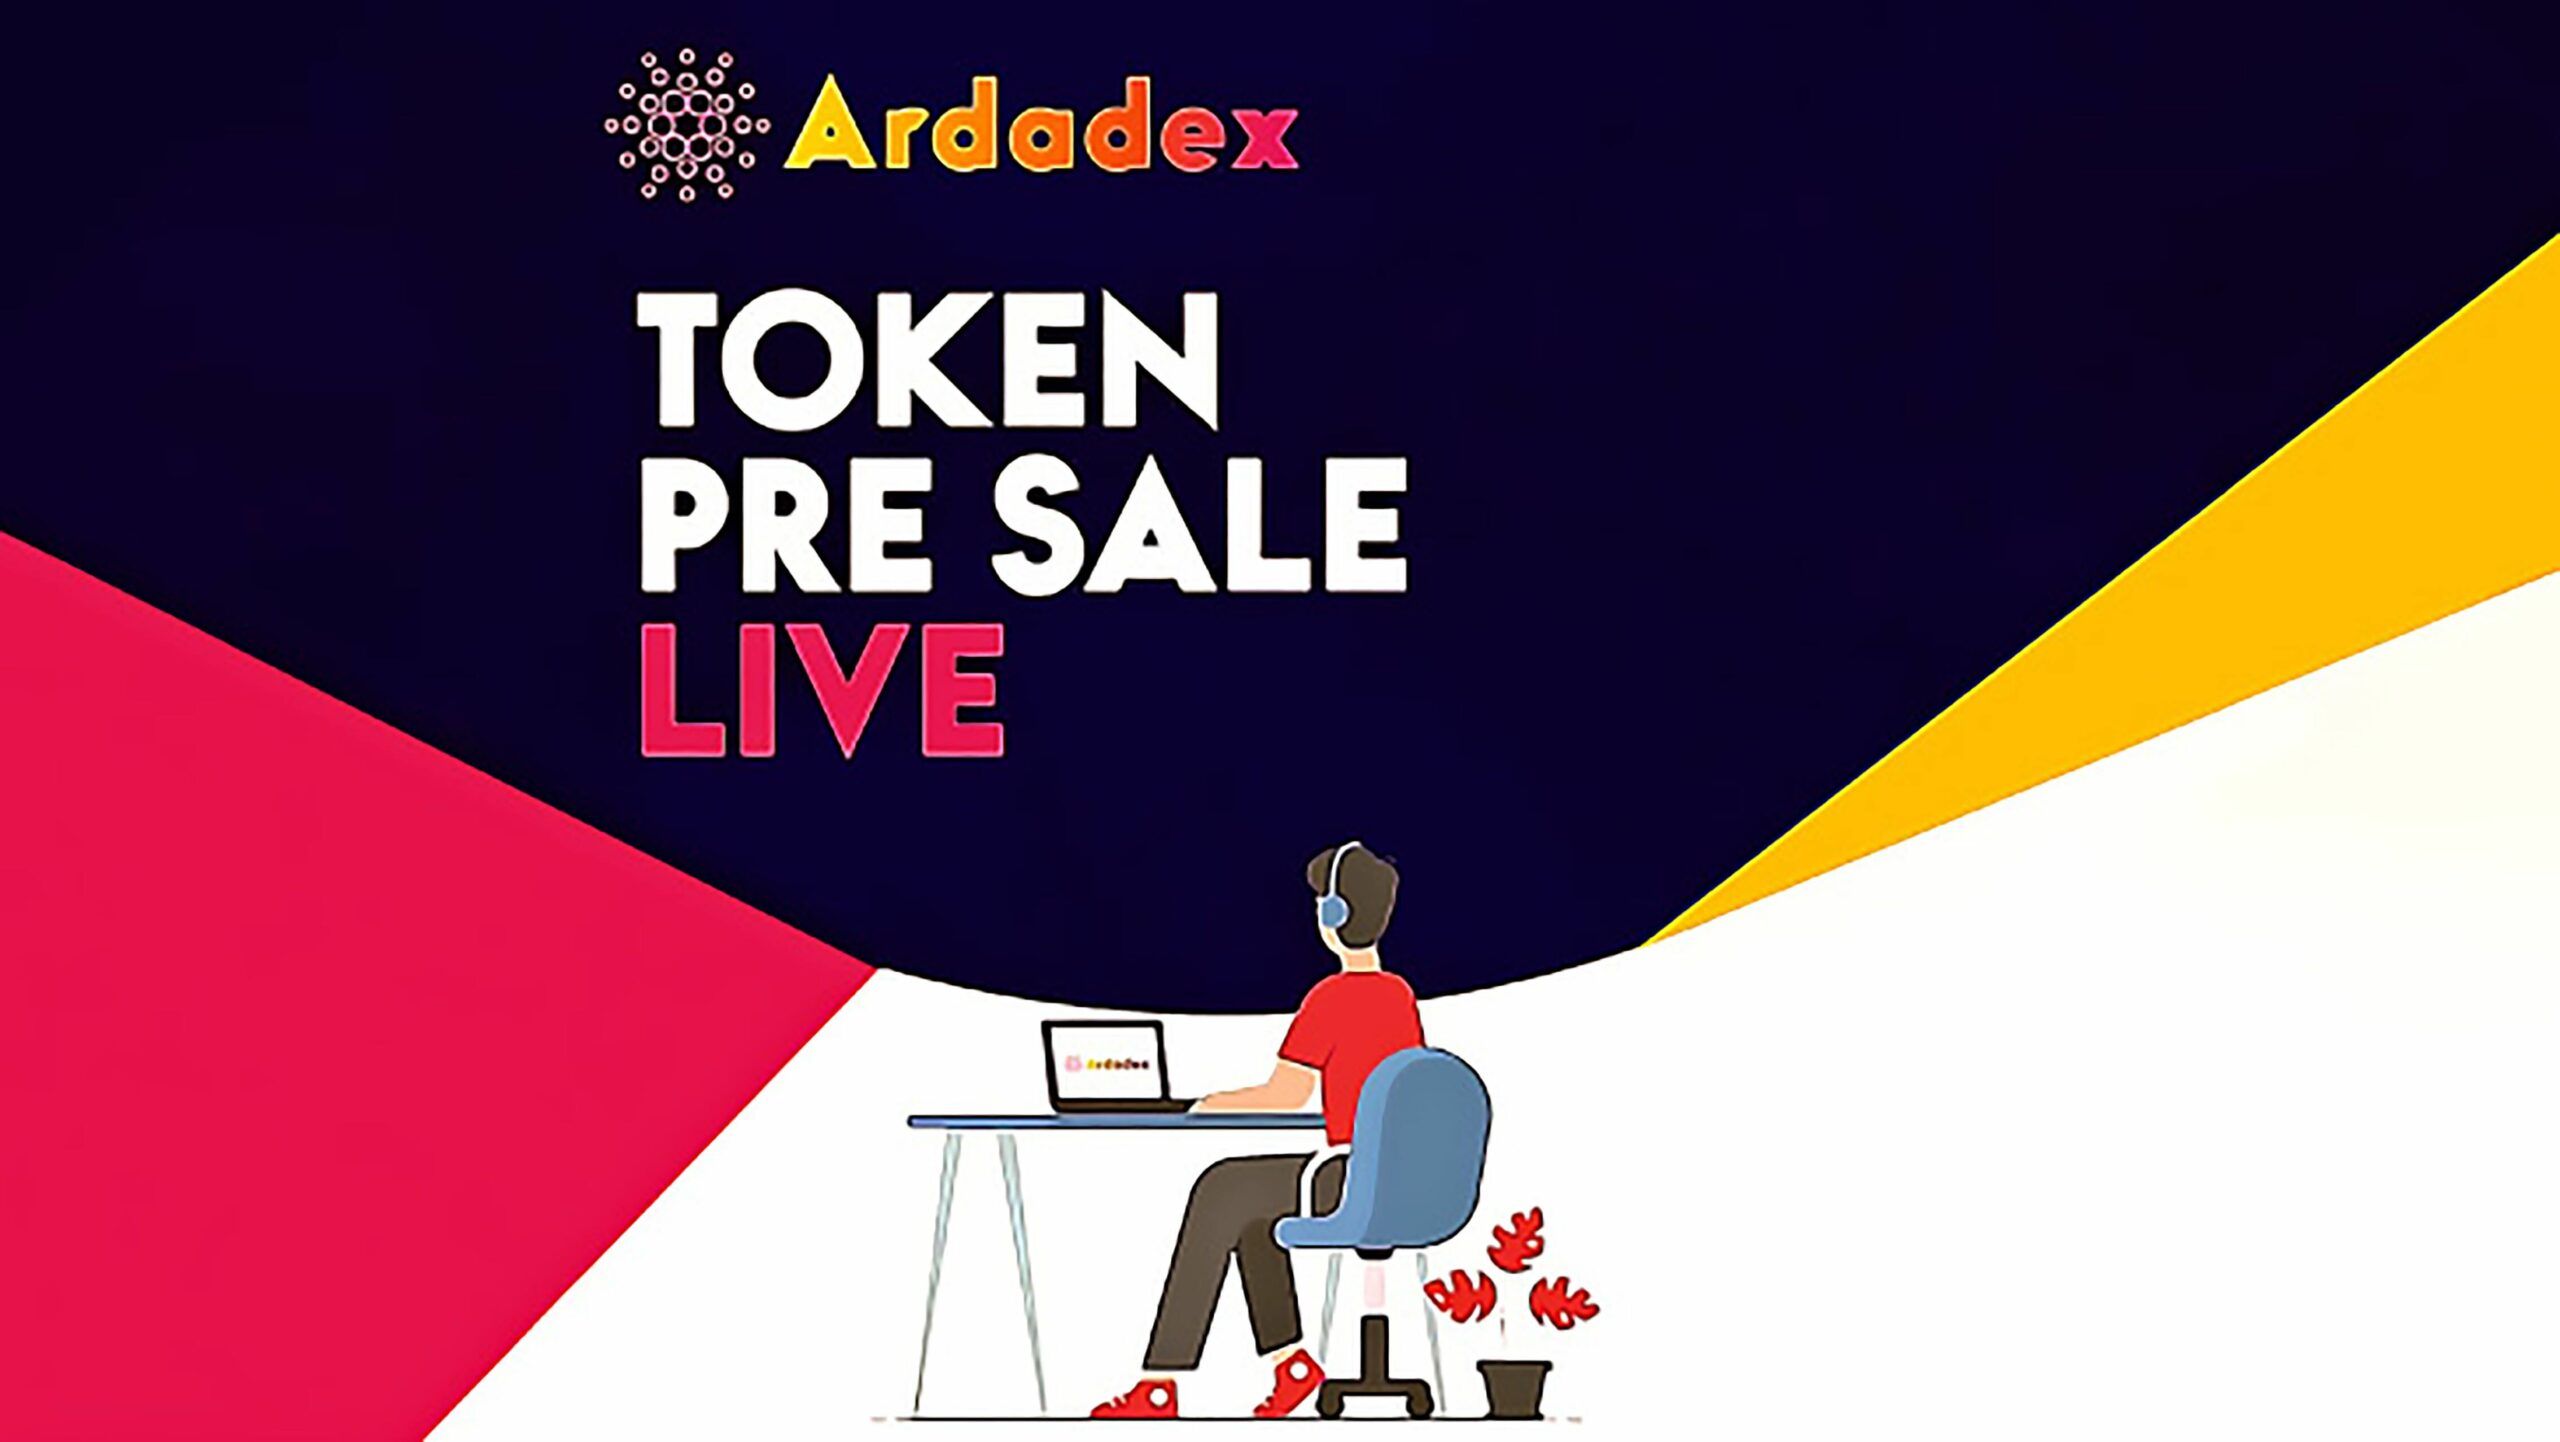 Ardadex is First DEX and NFT Marketplace on Cardano